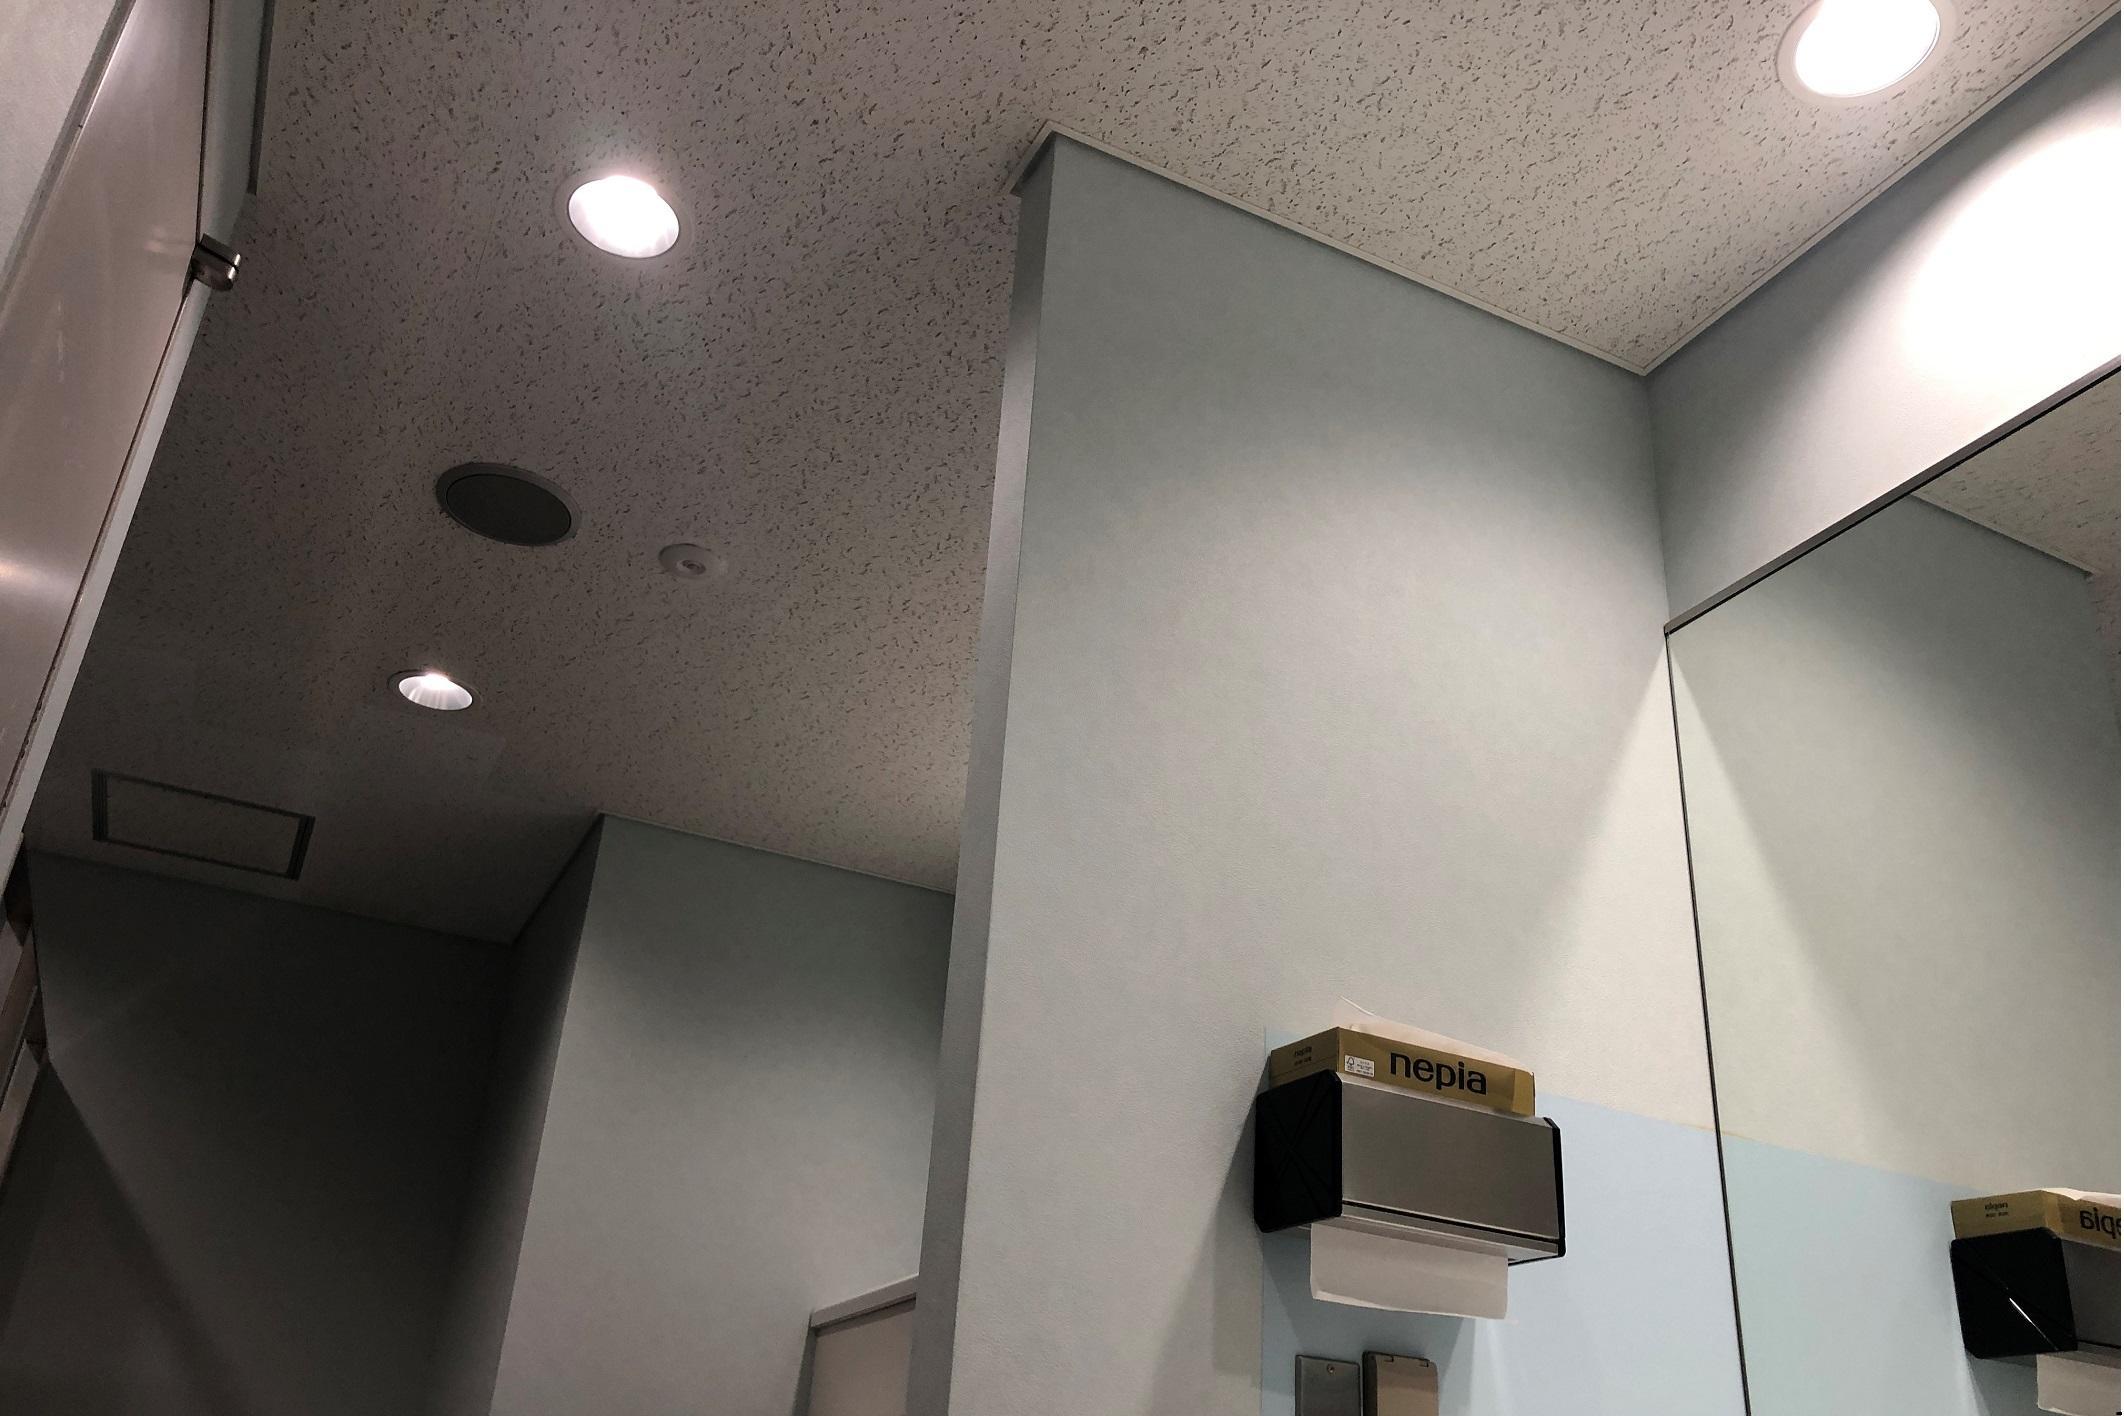 Sensing possible even across walls, detecting movement inside the toilet